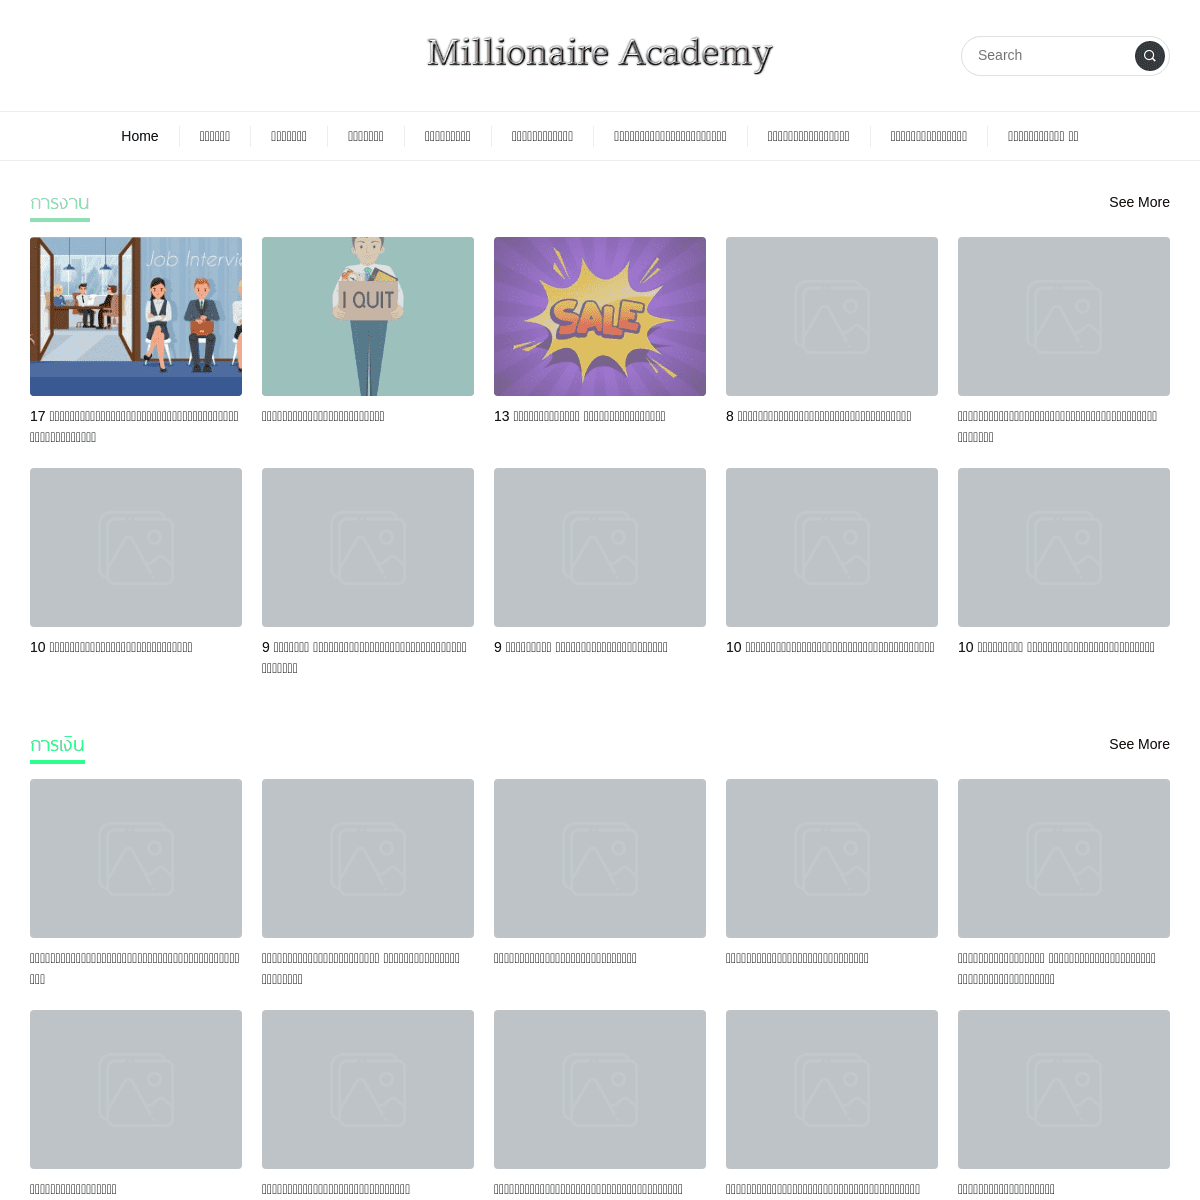 A complete backup of https://millionaire-academy.com